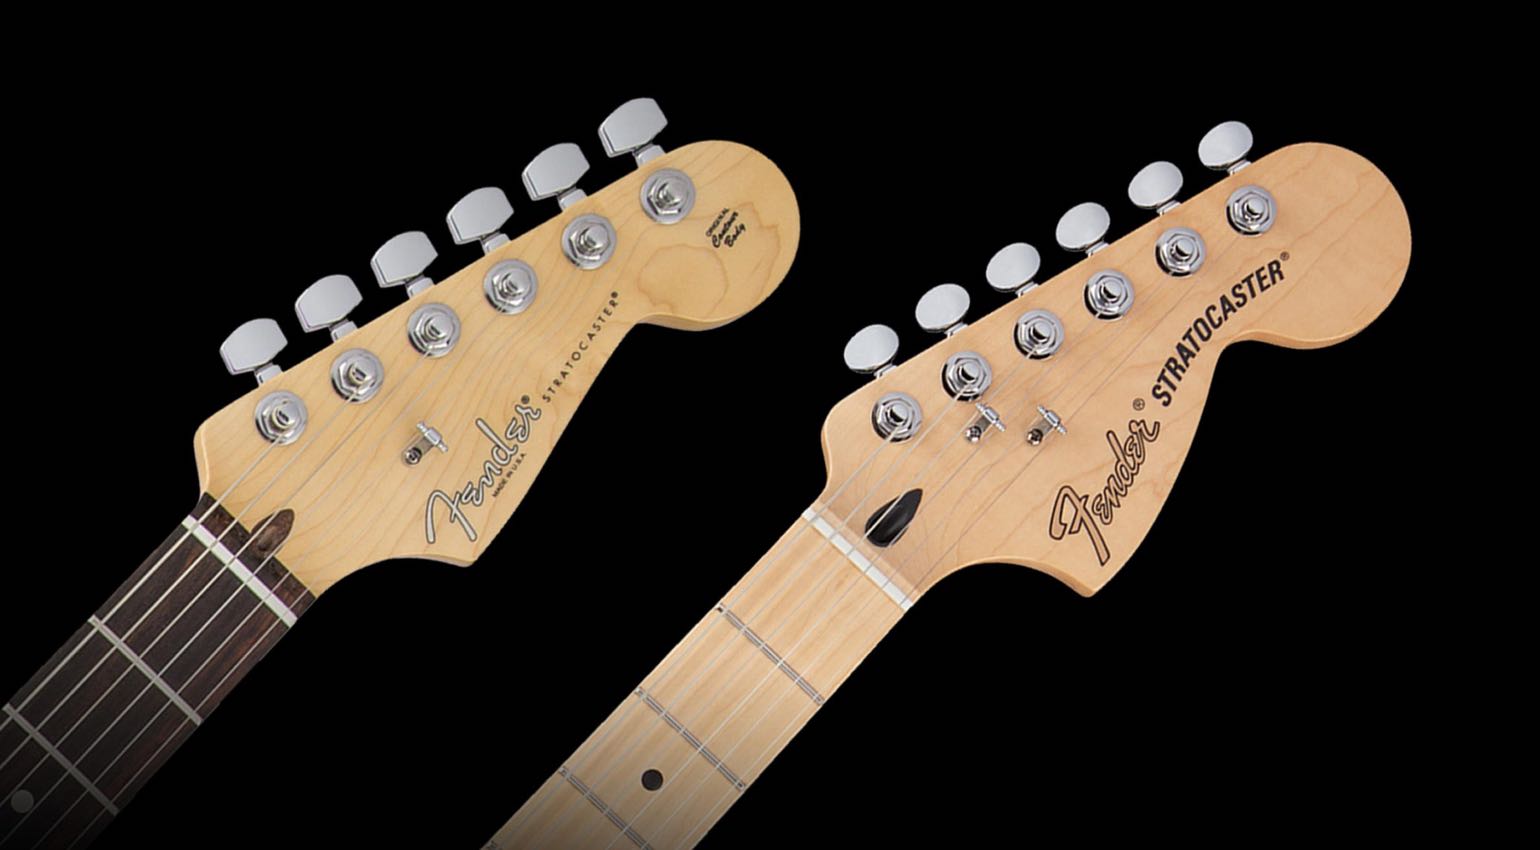 Fender cancelled $100 million of sales in 2022